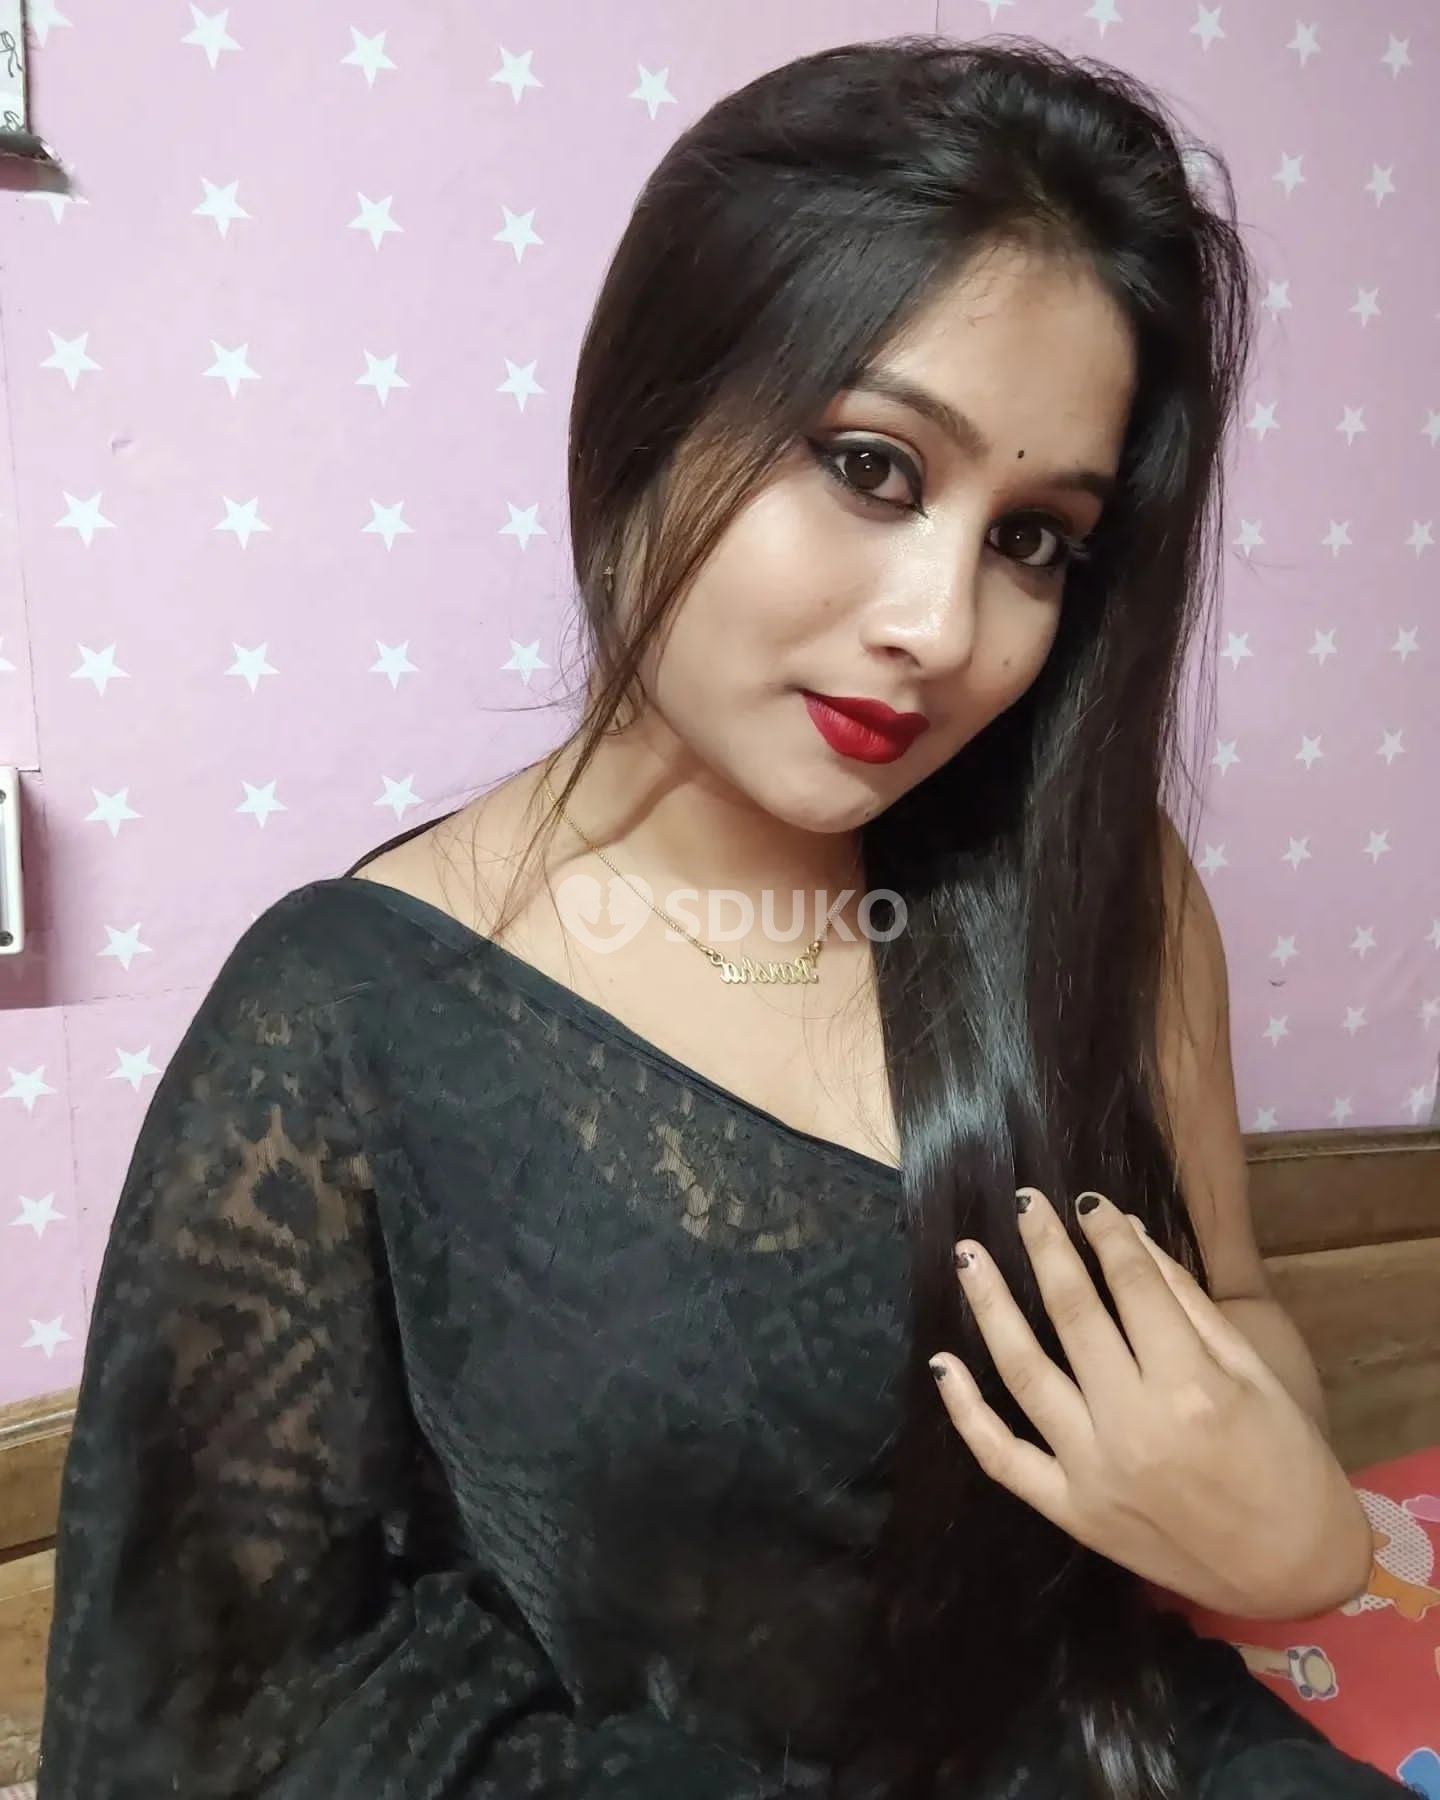 Indore...🆑 TODAY LOW PRICE 100% SAFE AND SECURE GENUINE CALL GIRL AFFORDABLE PRICE CALL NOW